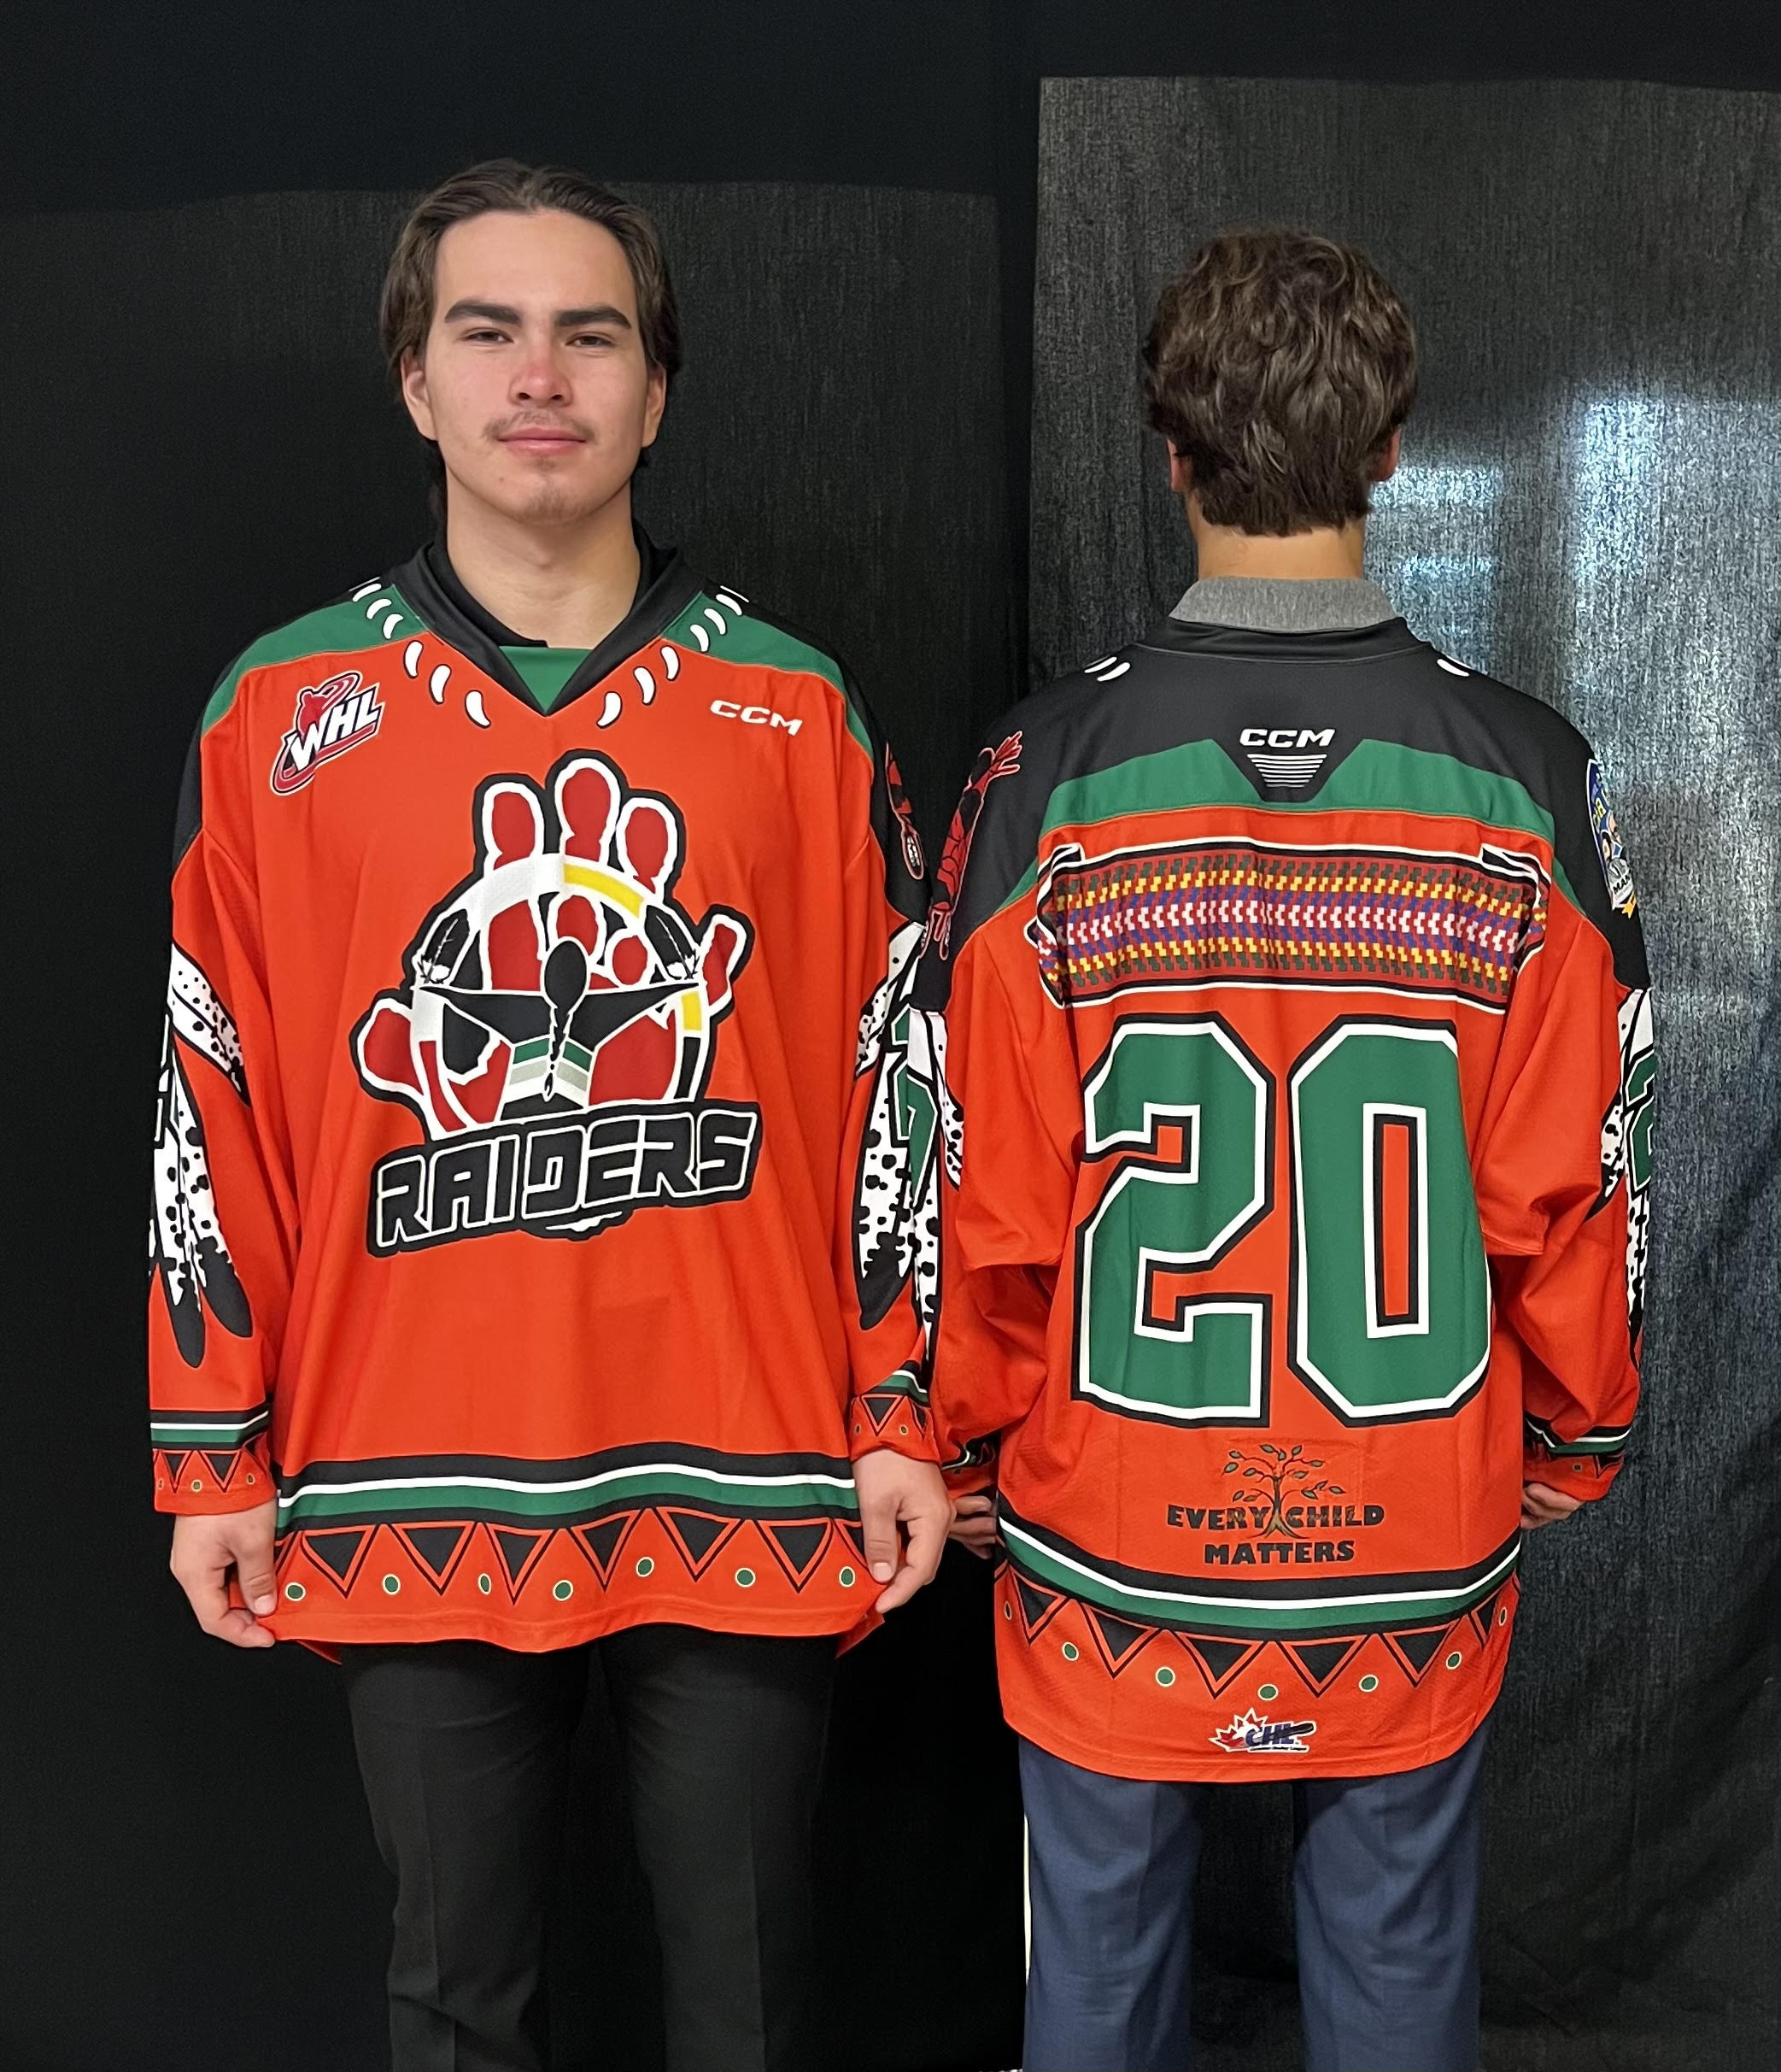 Prince Albert Raiders' “insensitive and offensive” jersey discontinued